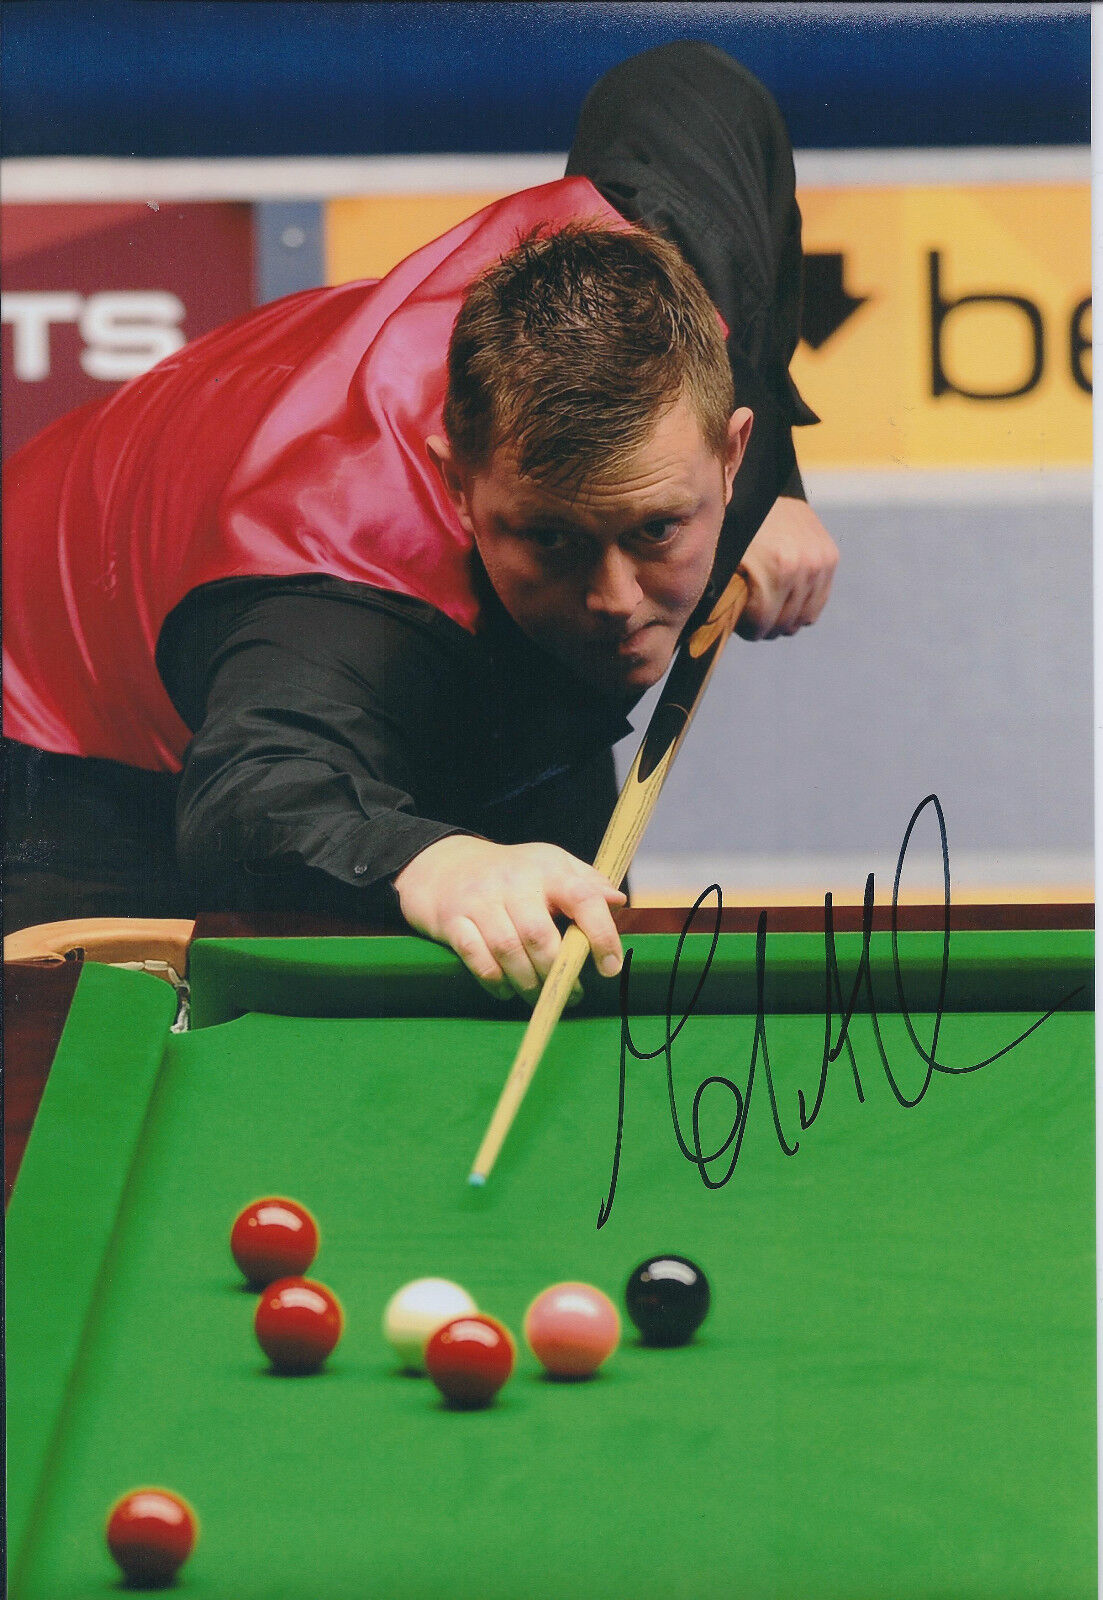 Mark ALLEN AUTOGRAPH 12x8 Signed Photo Poster painting AFTAL COA SNOOKER Player SHEFFIELD